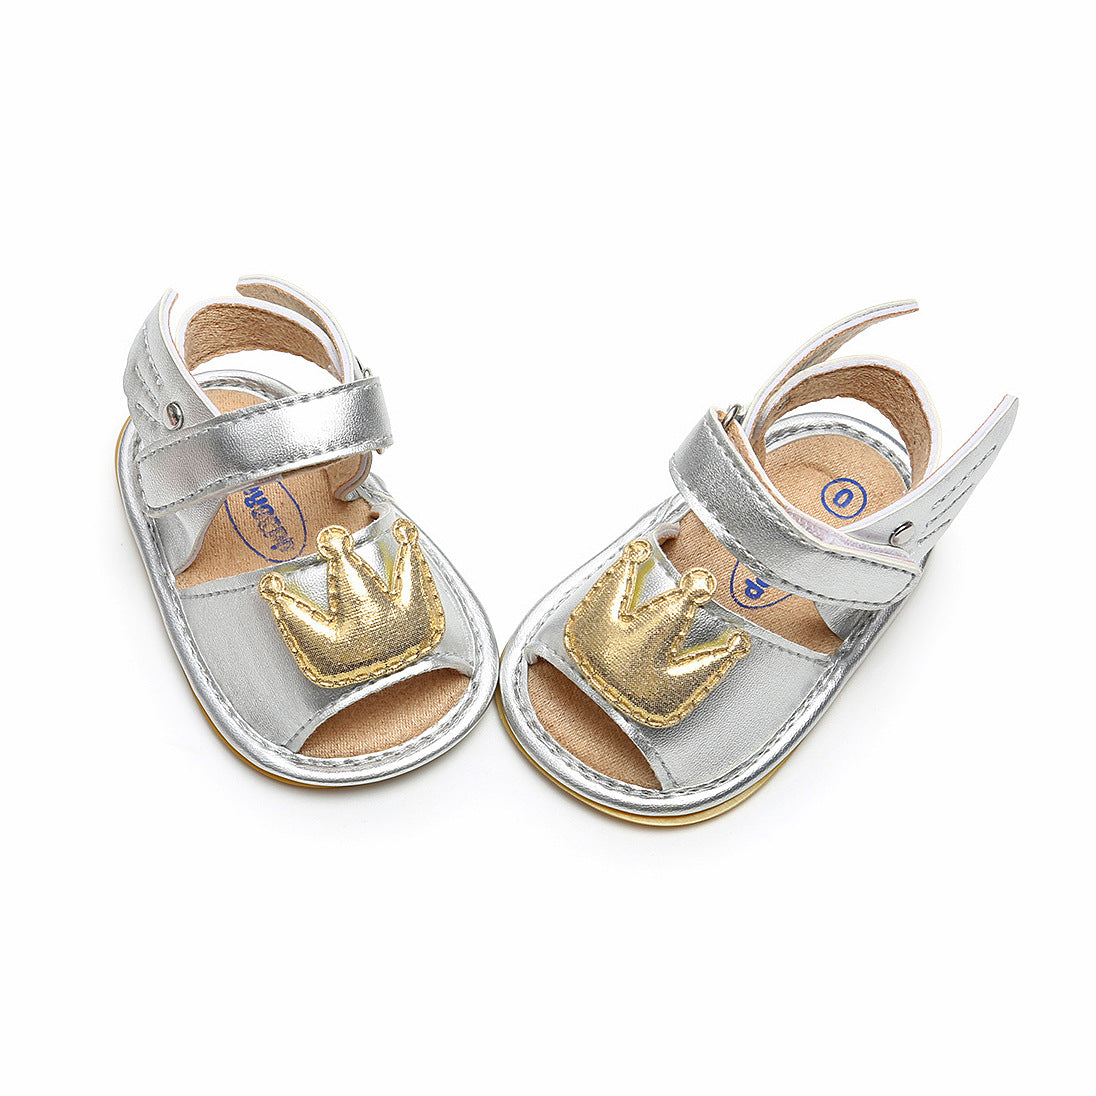 Spring And Summer 0-1 Year Old Baby Shoes Baby Sandals Baby Shoes Toddler Shoes